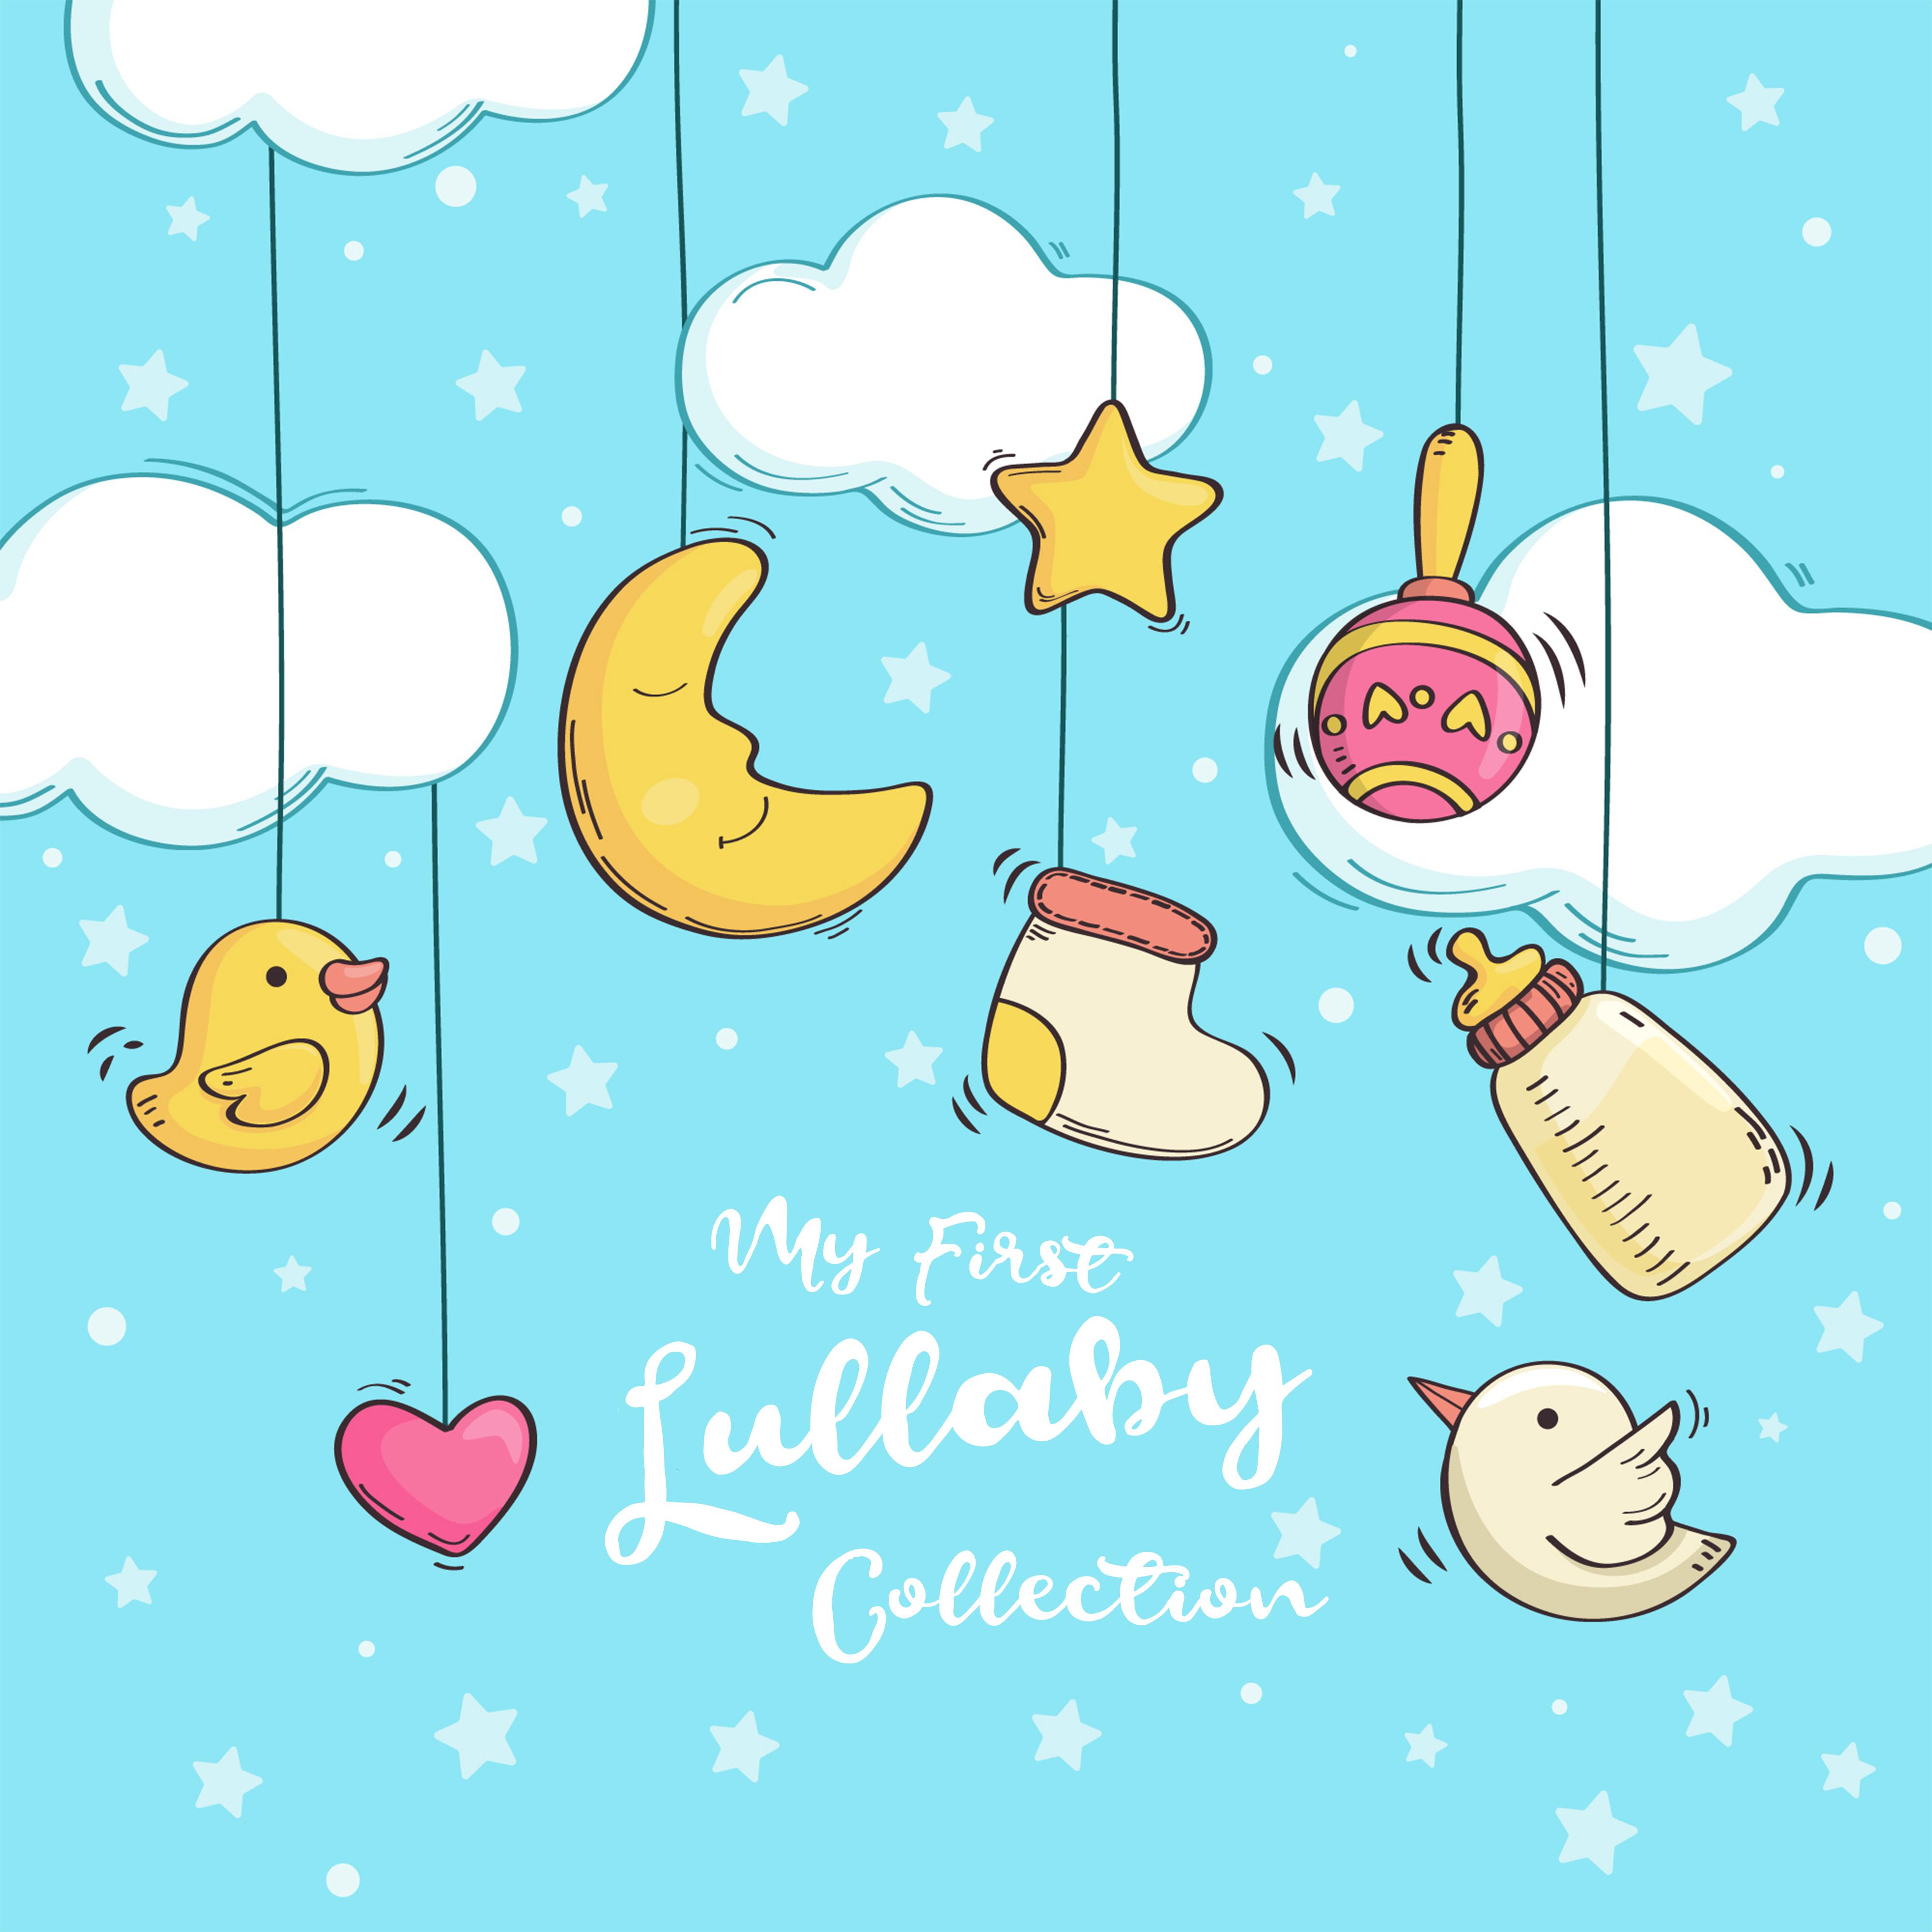 My First Lullaby Collection - 15 Piano Compositions for Sleeping, Napping and Lulling a Baby